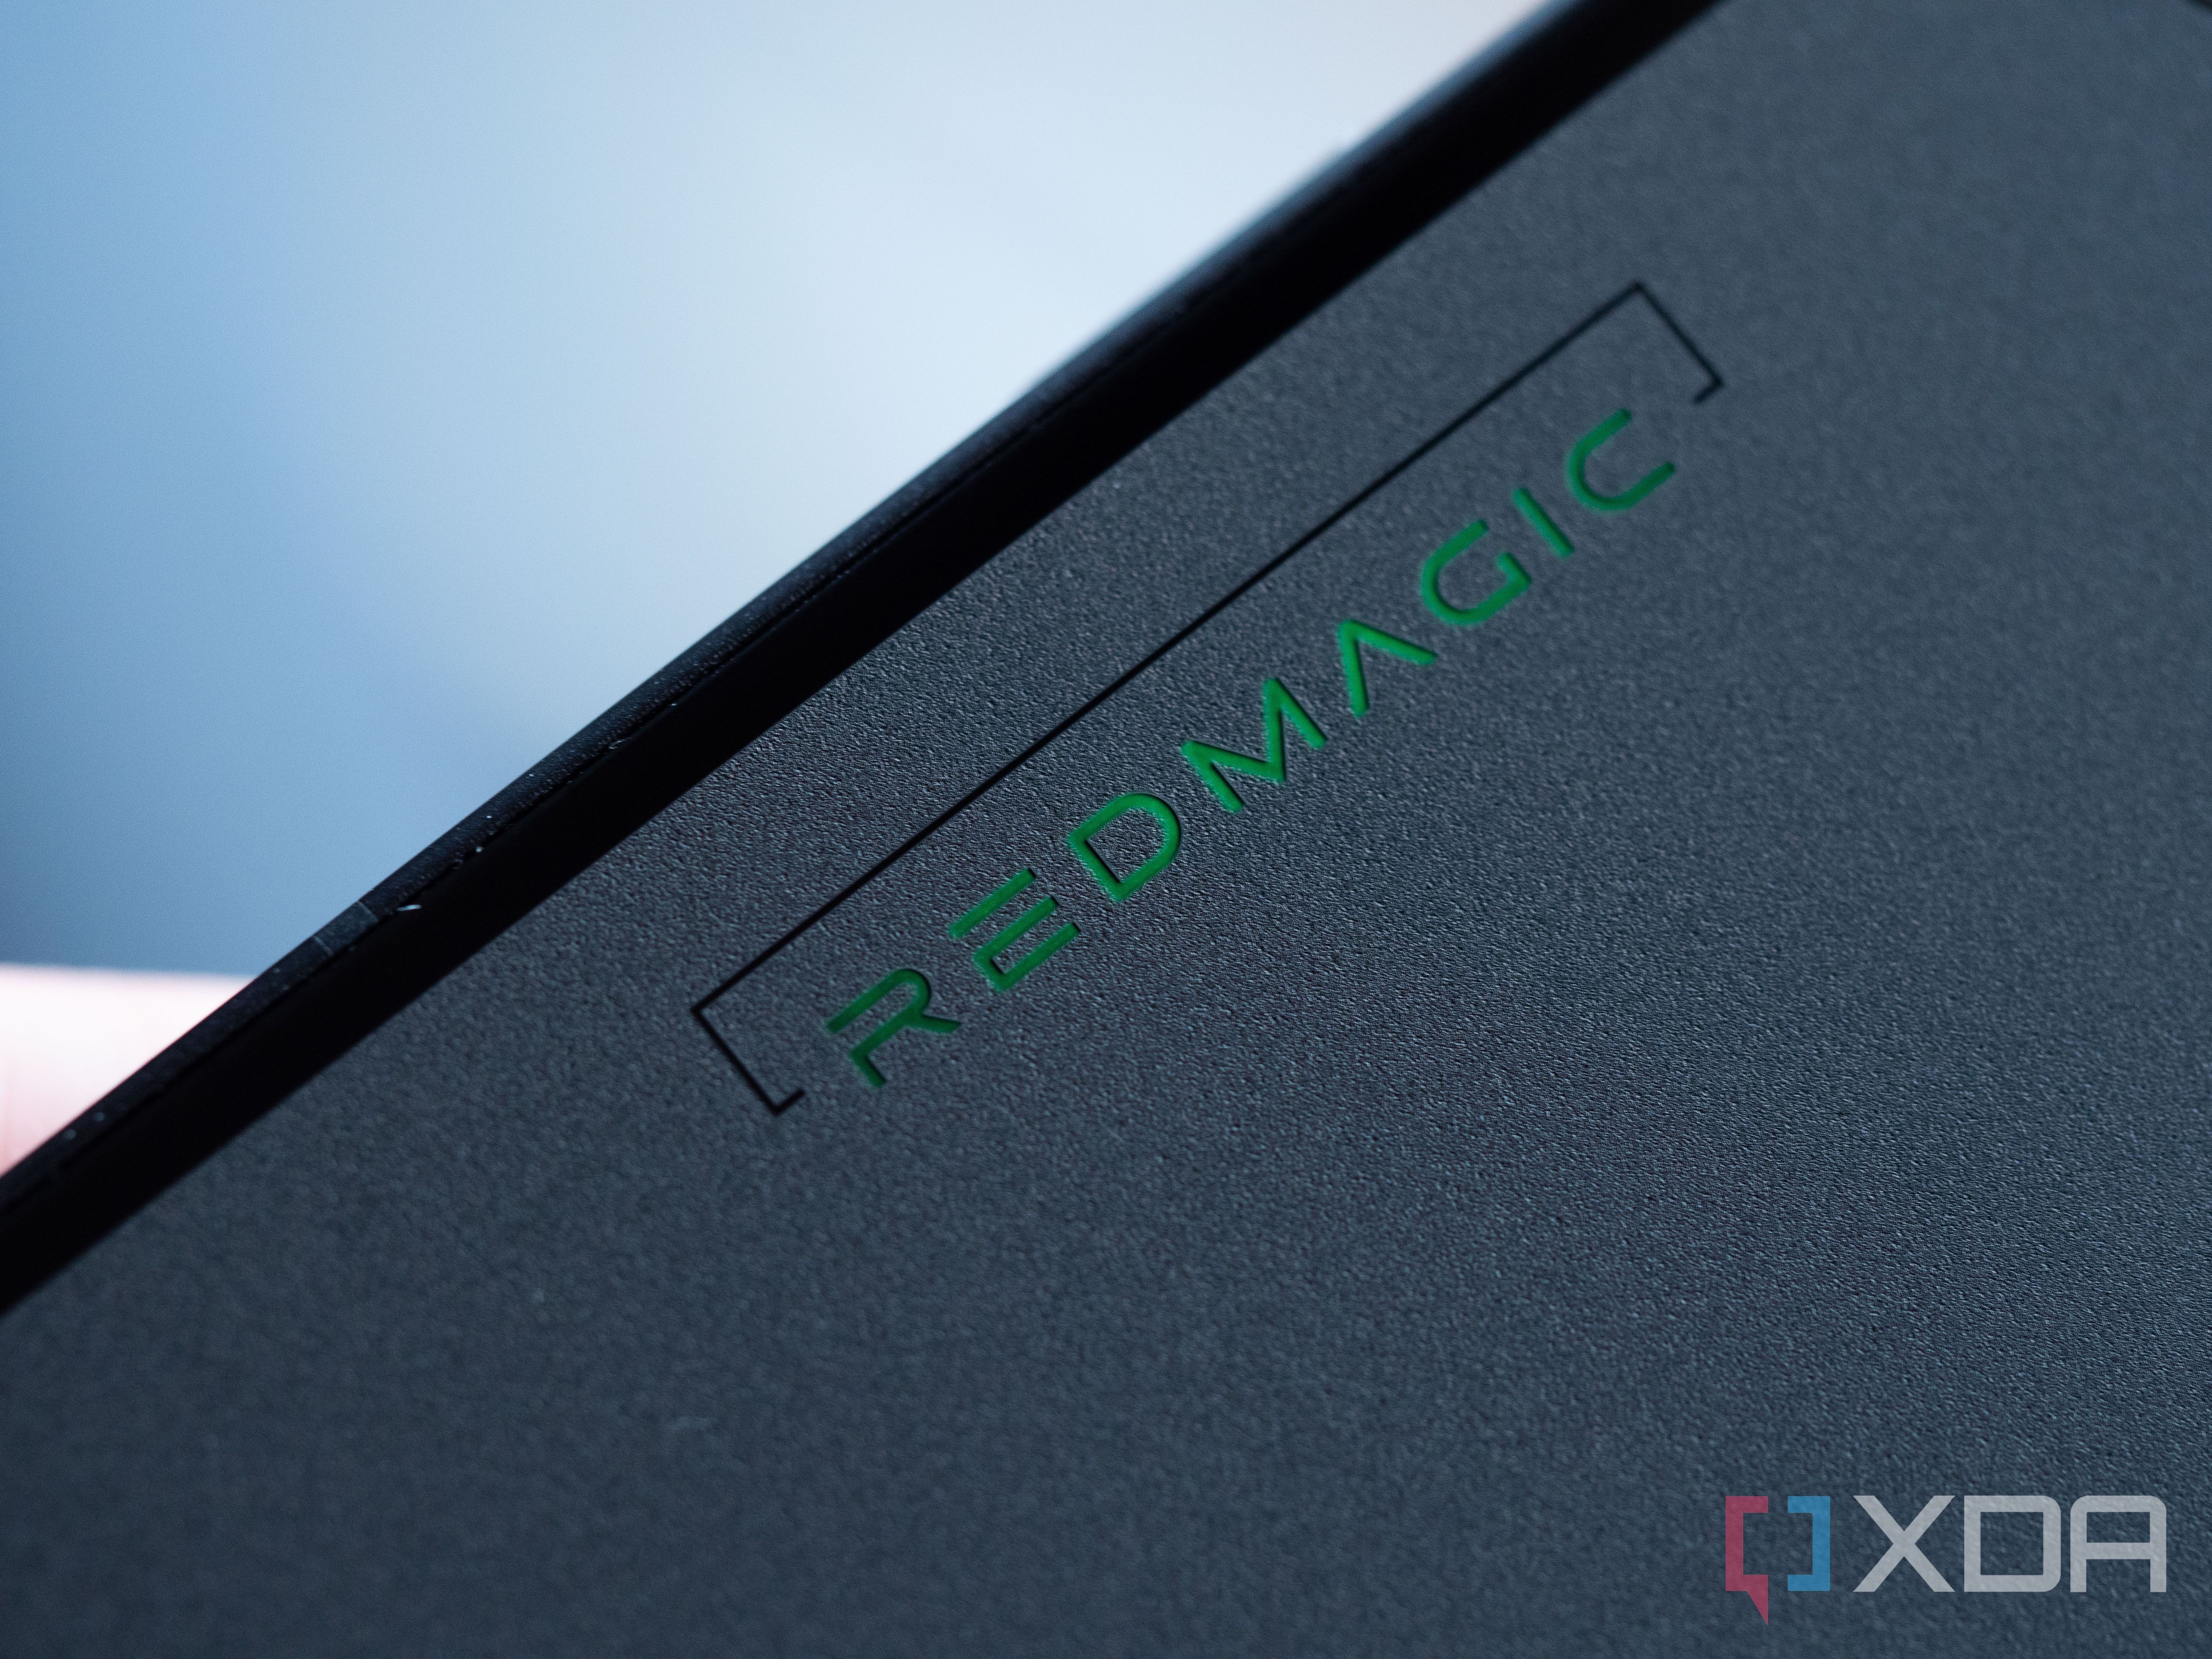 Redmagic 8 Pro Review: Great Form, Excellent Hardware